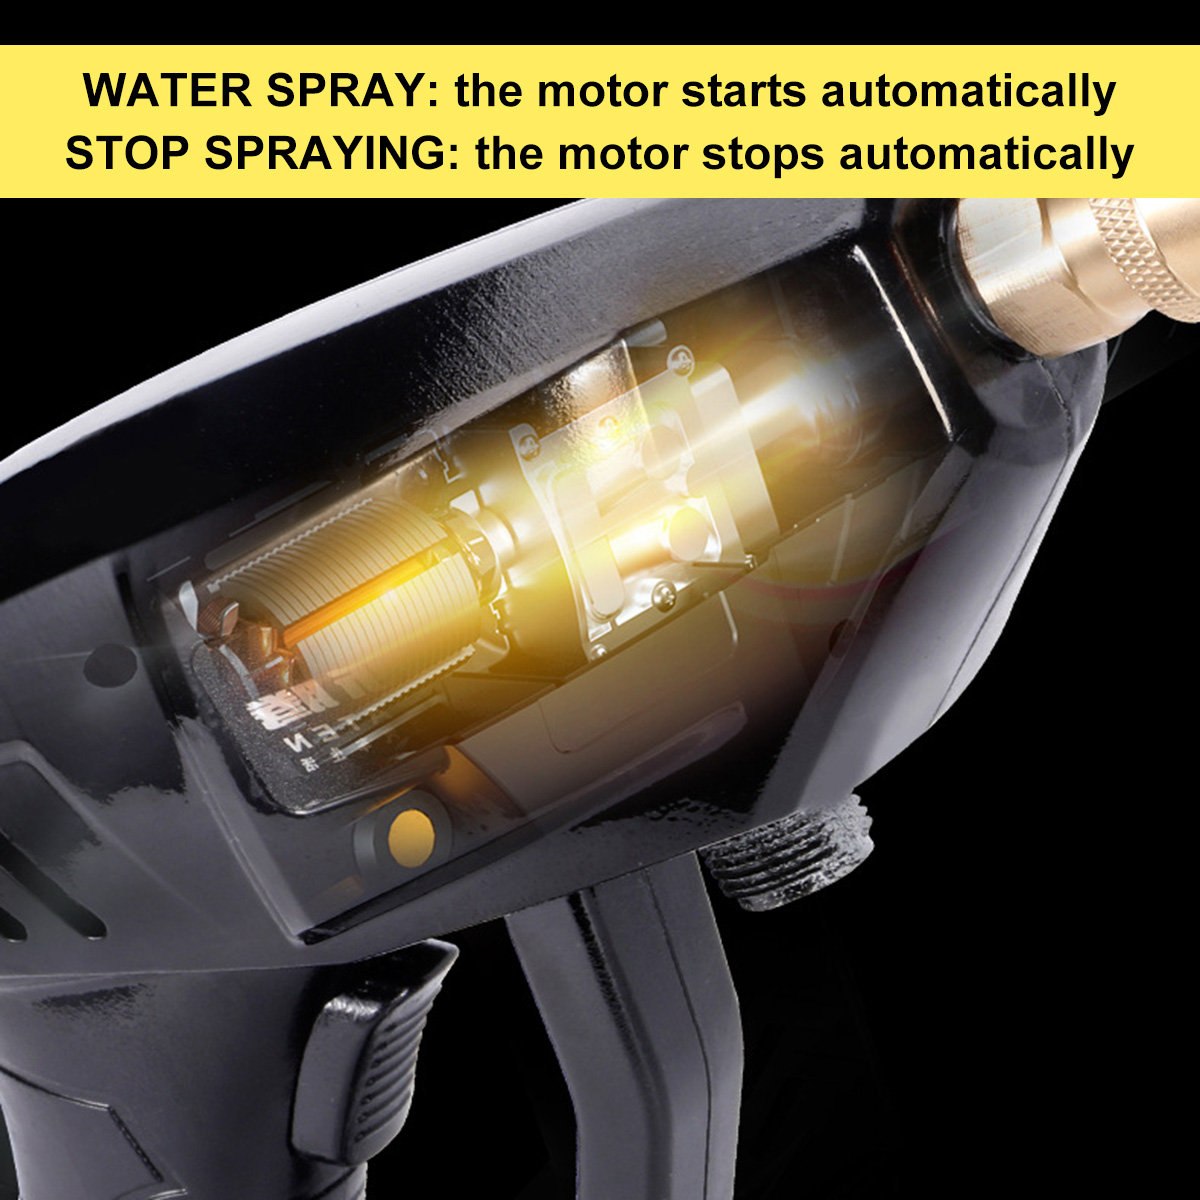 12V-15000mAh-Cordless-Electric-Pressure-Washer-Rechargeable-Car-Washing-Machine-Water-Spray-Guns-W-1-1830643-4